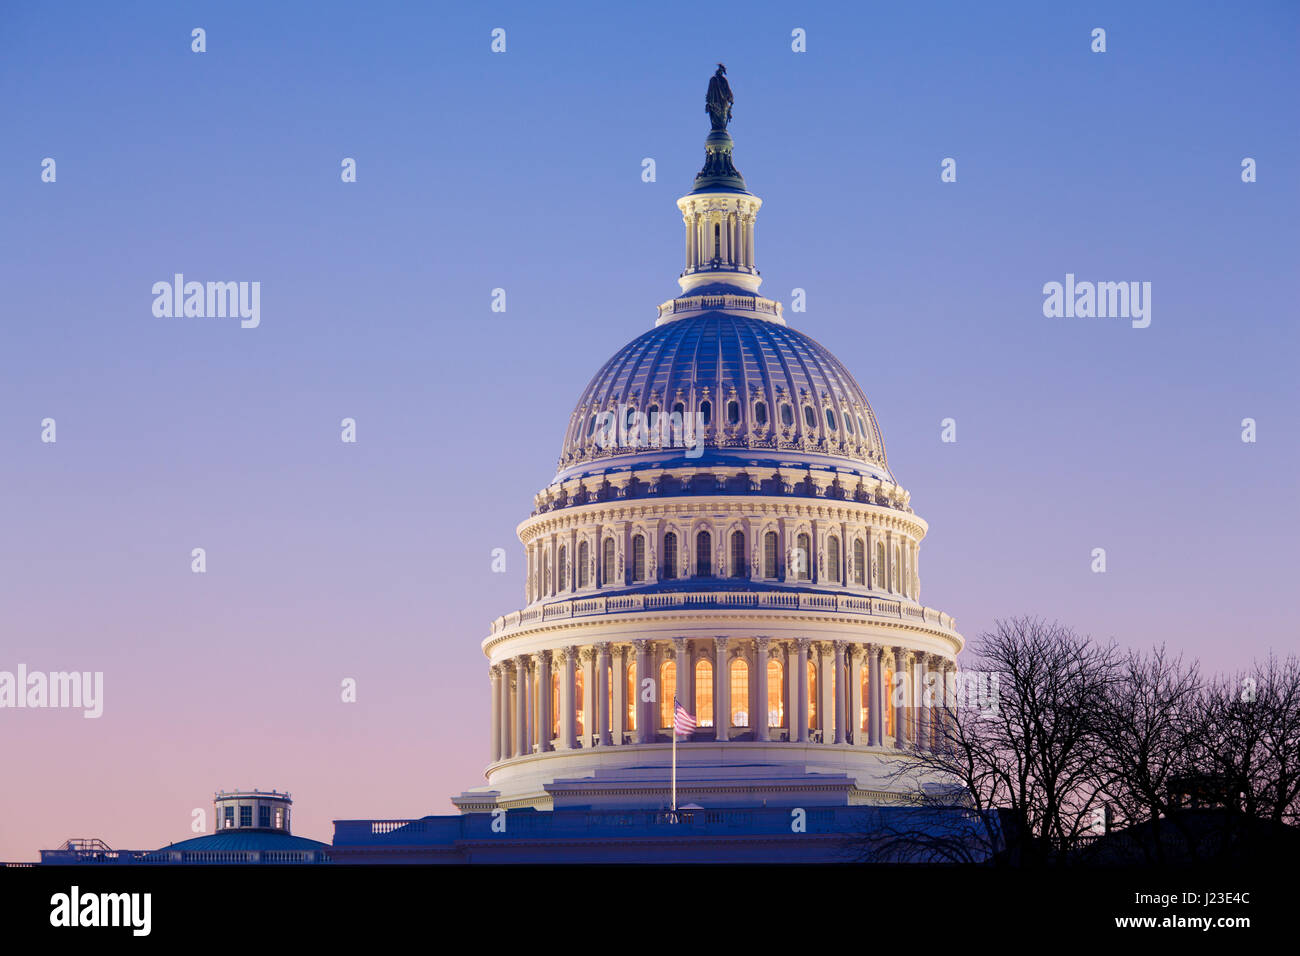 Dome of the Capitol building at dawn in Washington DC with the Statue of Freedom in the sunlight Stock Photo